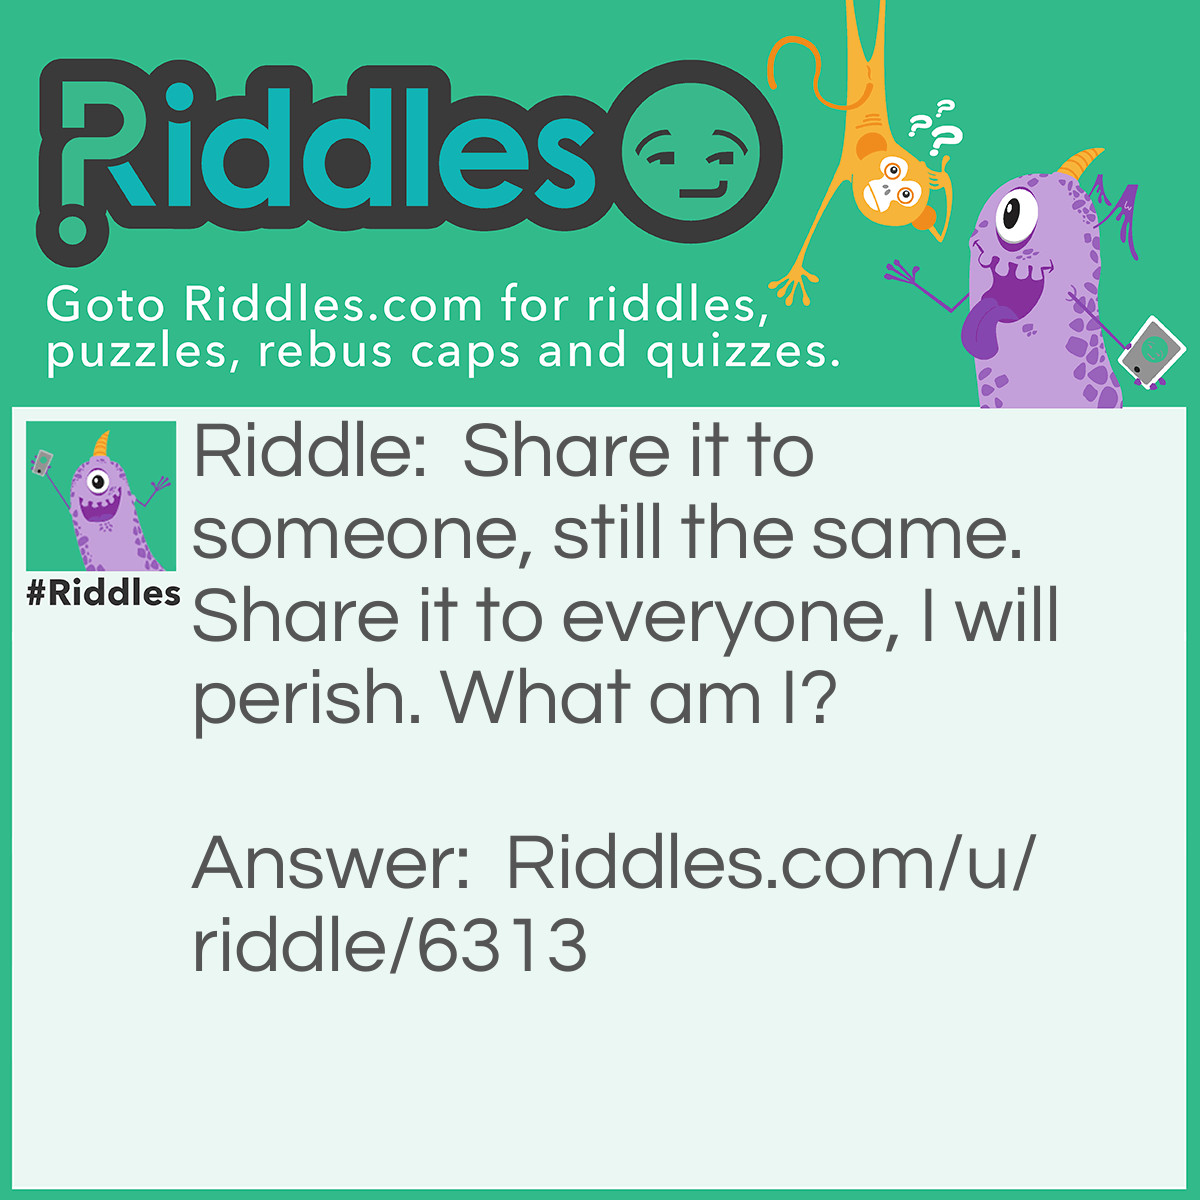 Riddle: Share it to someone, still the same. Share it to everyone, I will perish. What am I? Answer: A Secret.